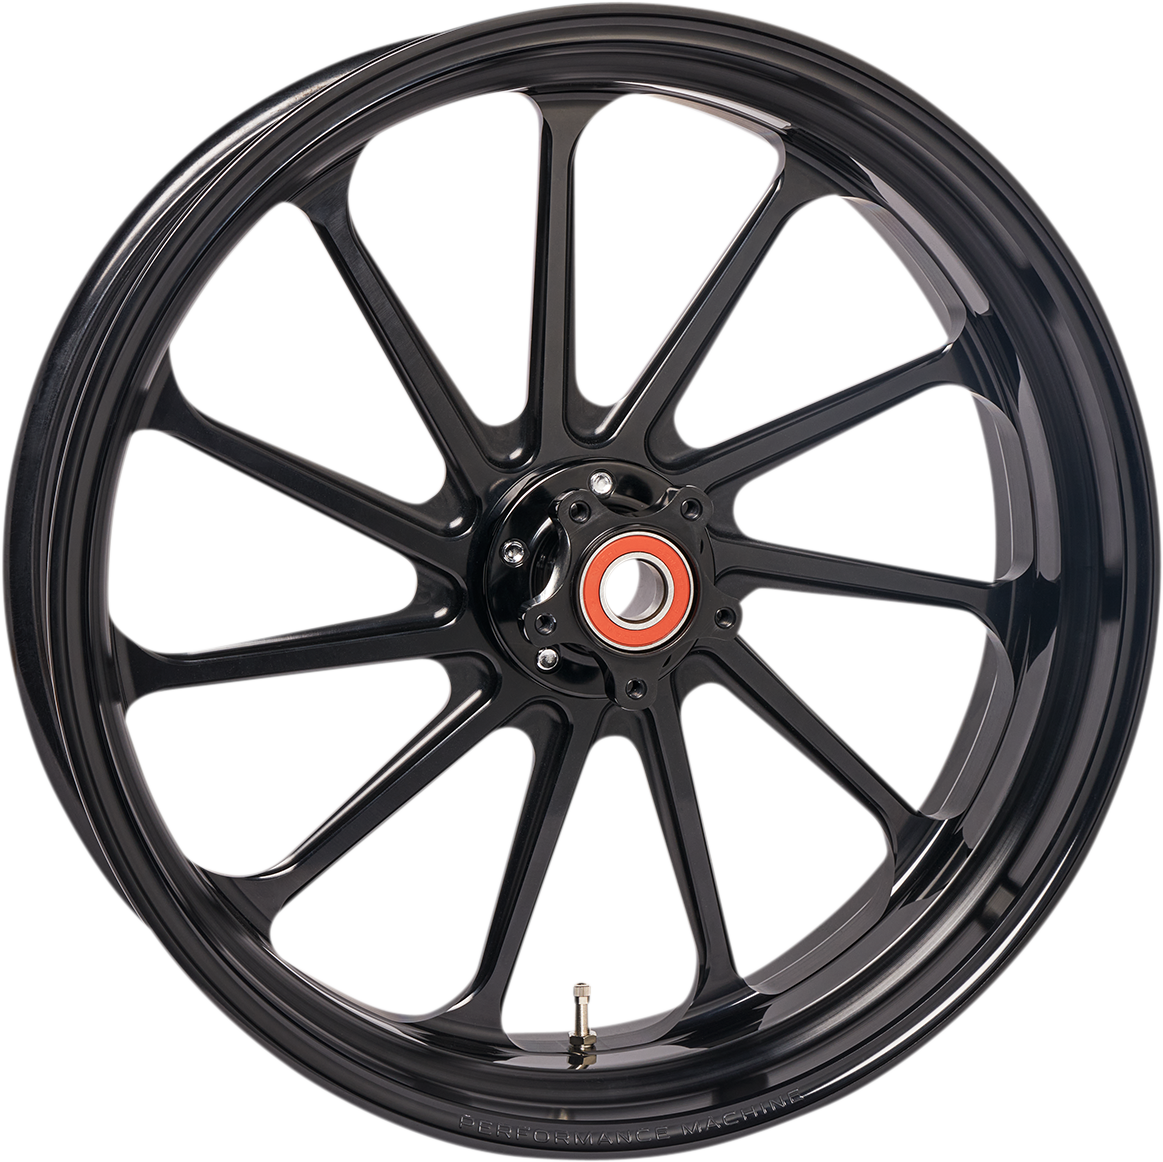 Wheel - Assault - Dual Disc - Front - Gold Ops™ - 21"x3.50" - Without ABS